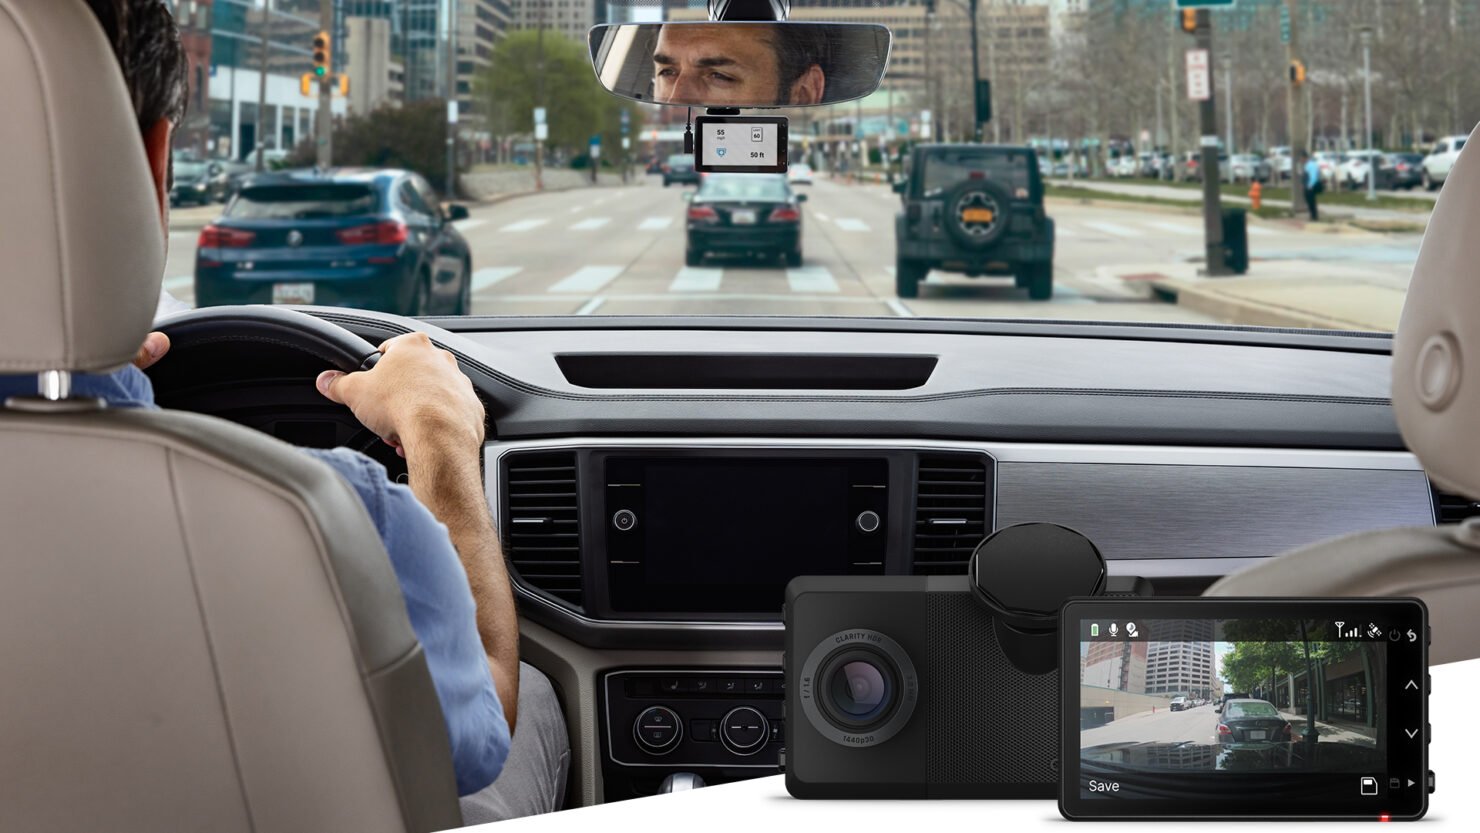 Best car camera with GPS tracker-security camera 24 hours record